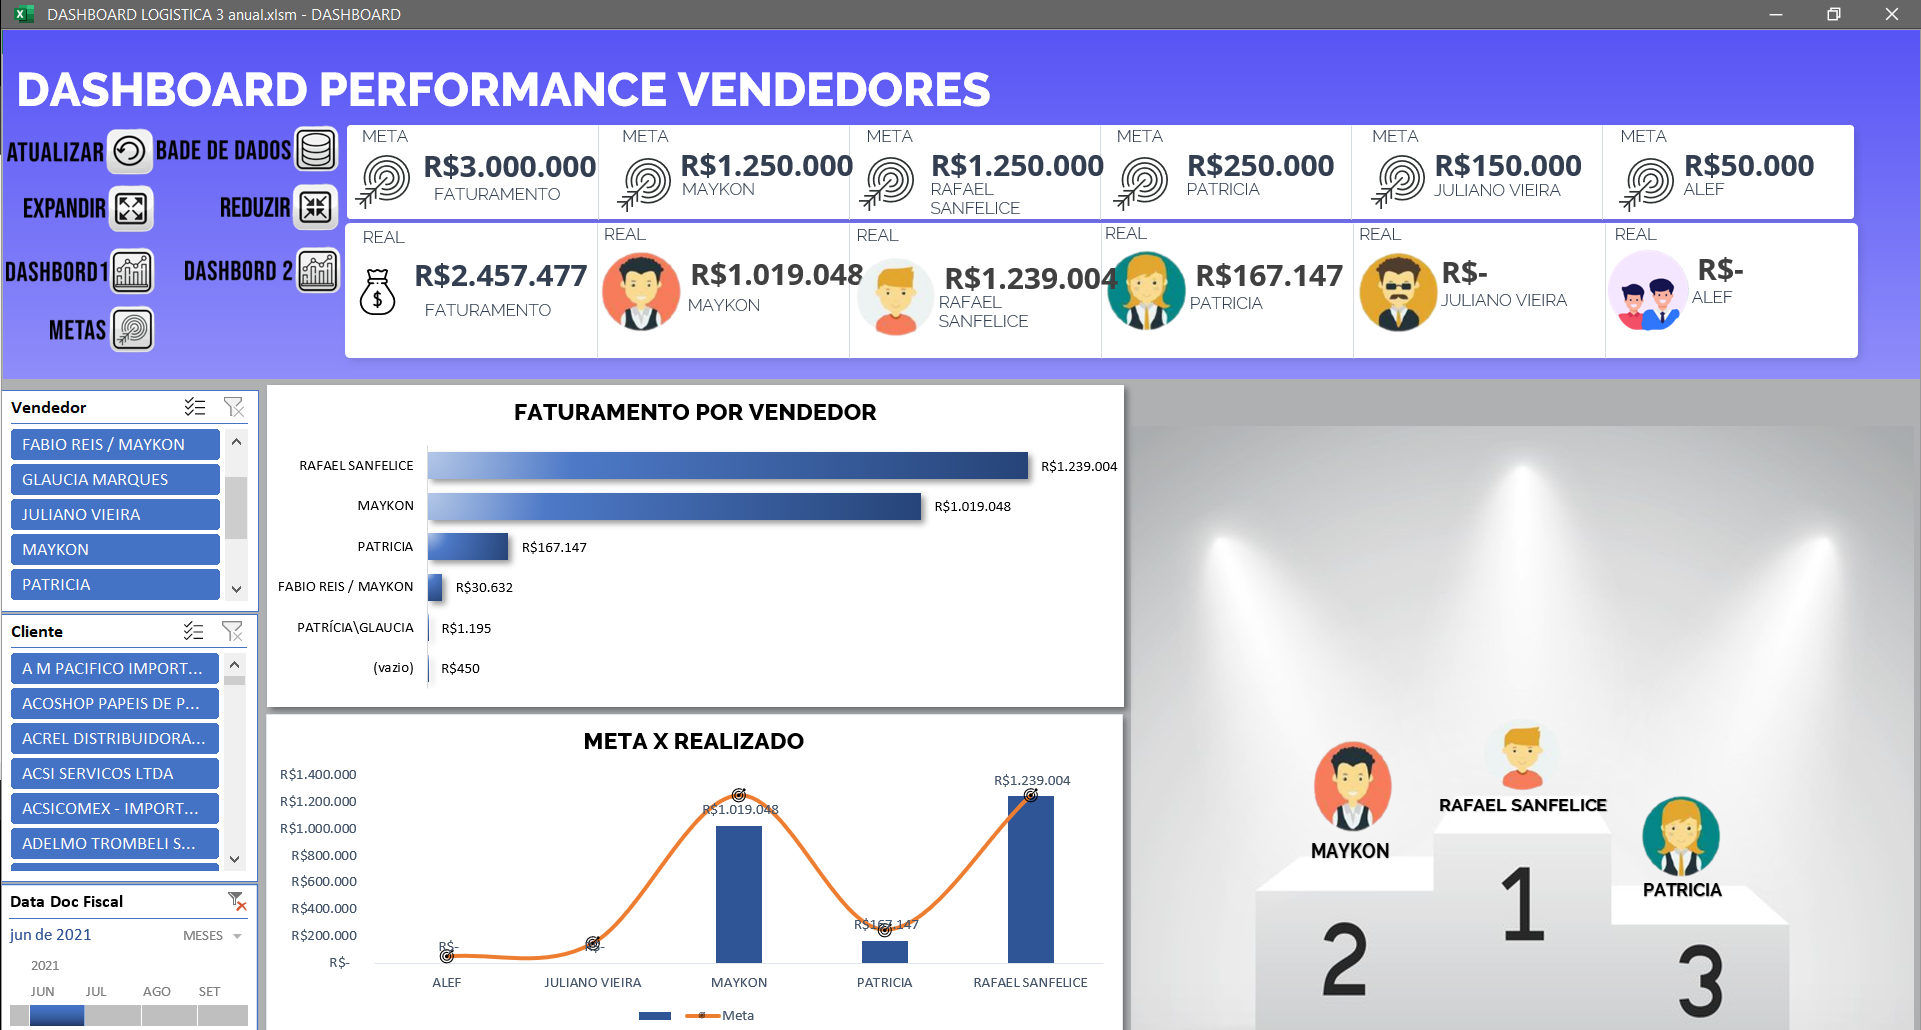 painel-logistico-performance-vendedores-1-1.png